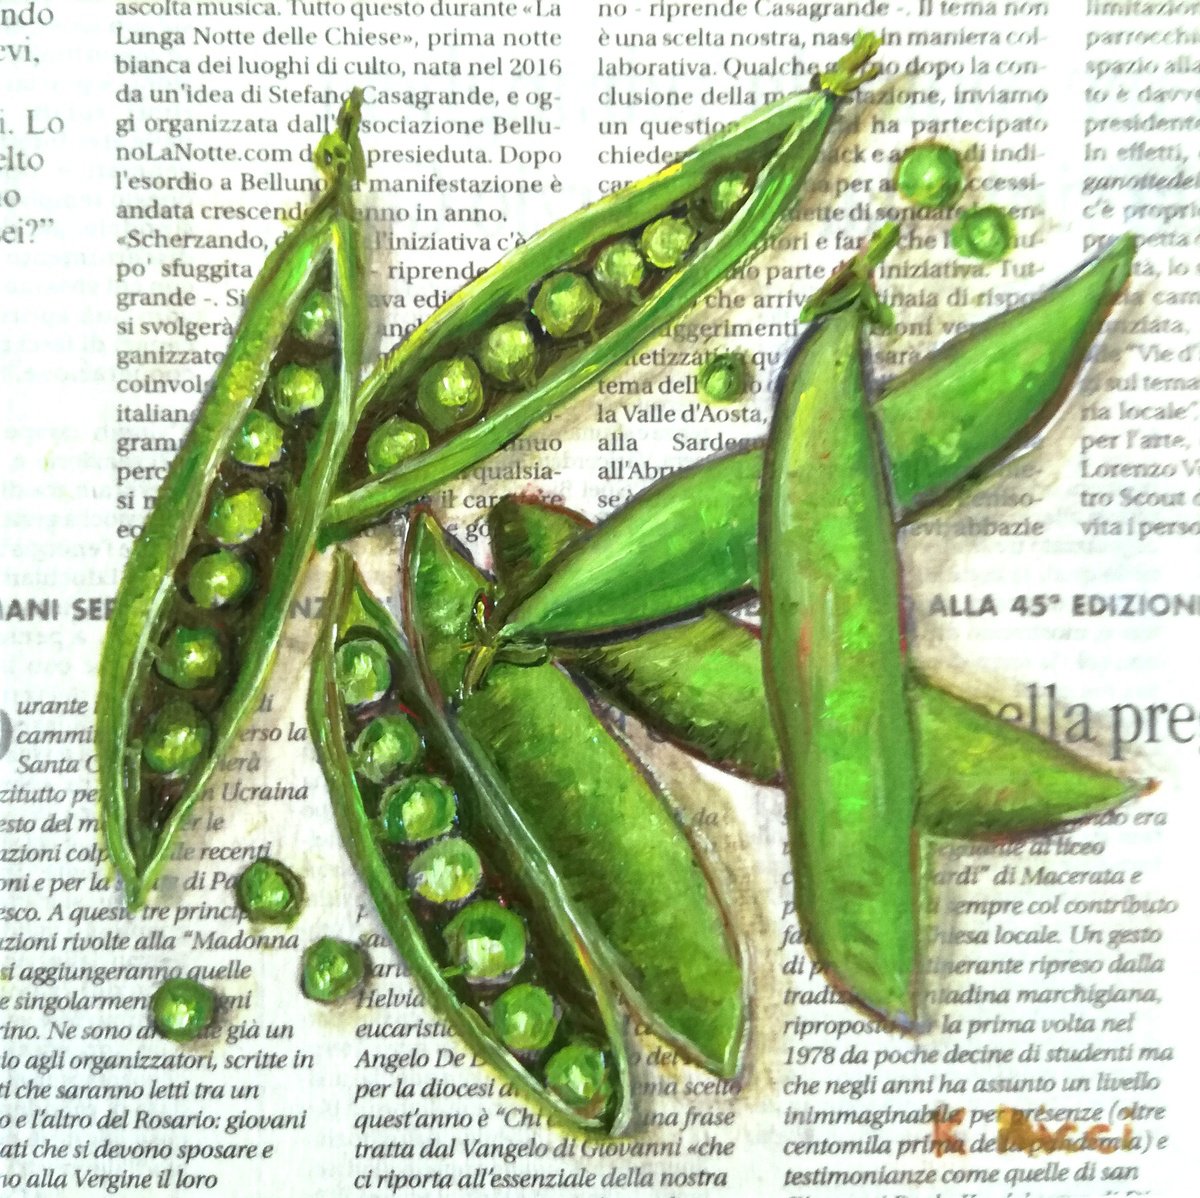 Pea Pods on Newspaper Original Oil on Canvas Board Painting 6 by 6 inches (15x15 cm) by Katia Ricci